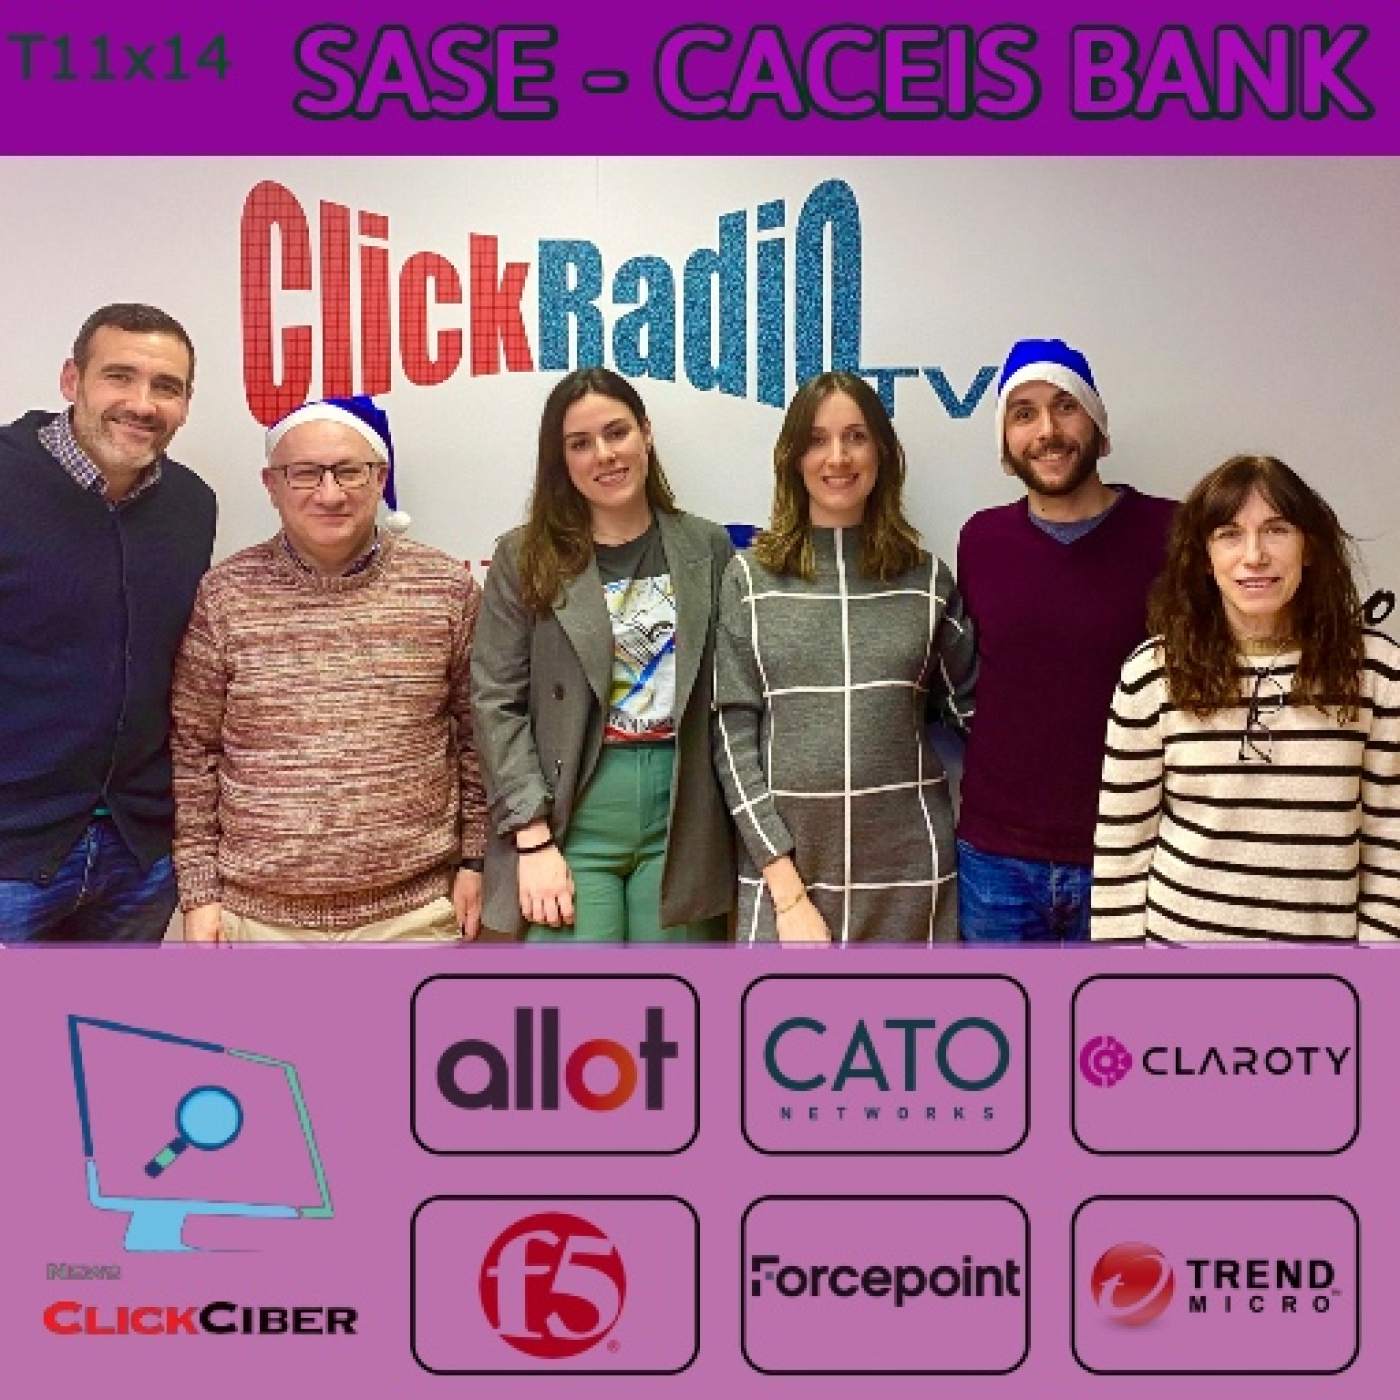 T11x14 - SASE - CATO Networks - CACEIS BAnk